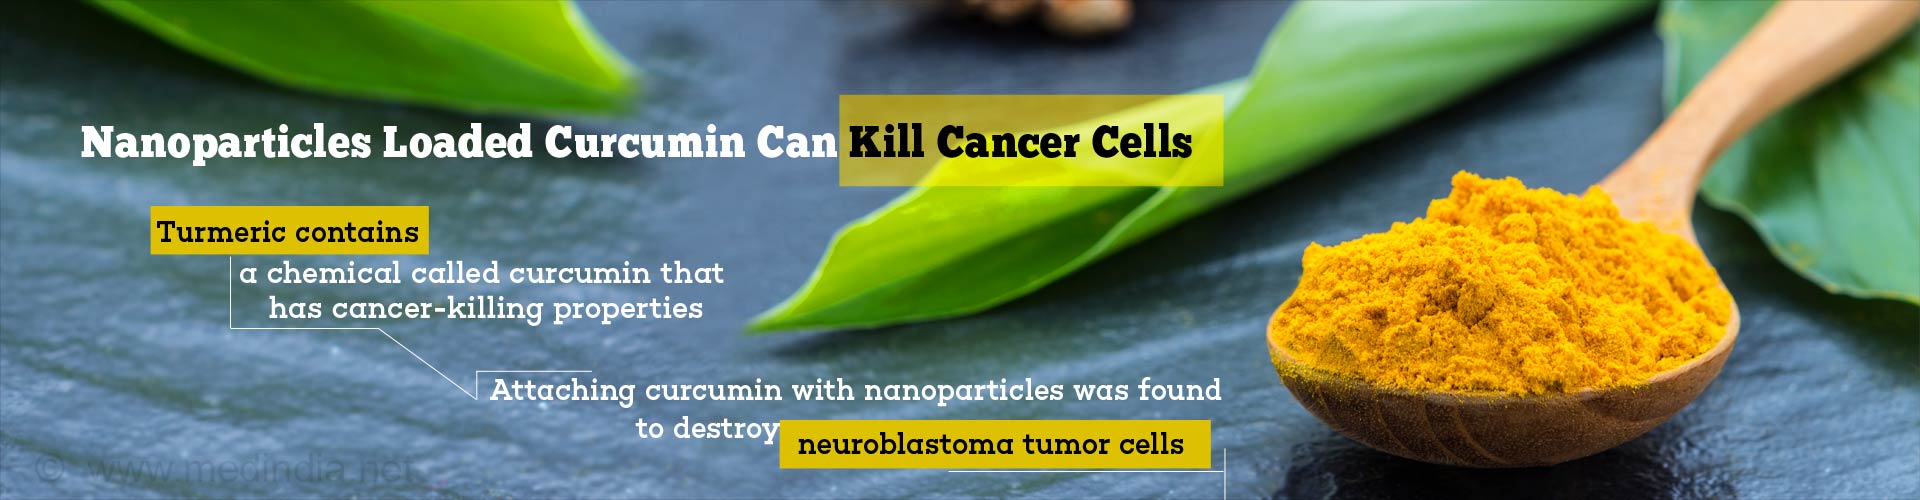 Nanoparticles loaded curcumin can kill cancer cells
- Turmeric contains a chemical called curcumin that has cancer-killing properties
- Attaching curcumin with nanoparticles was found to destroy neuroblastoma tumor cells